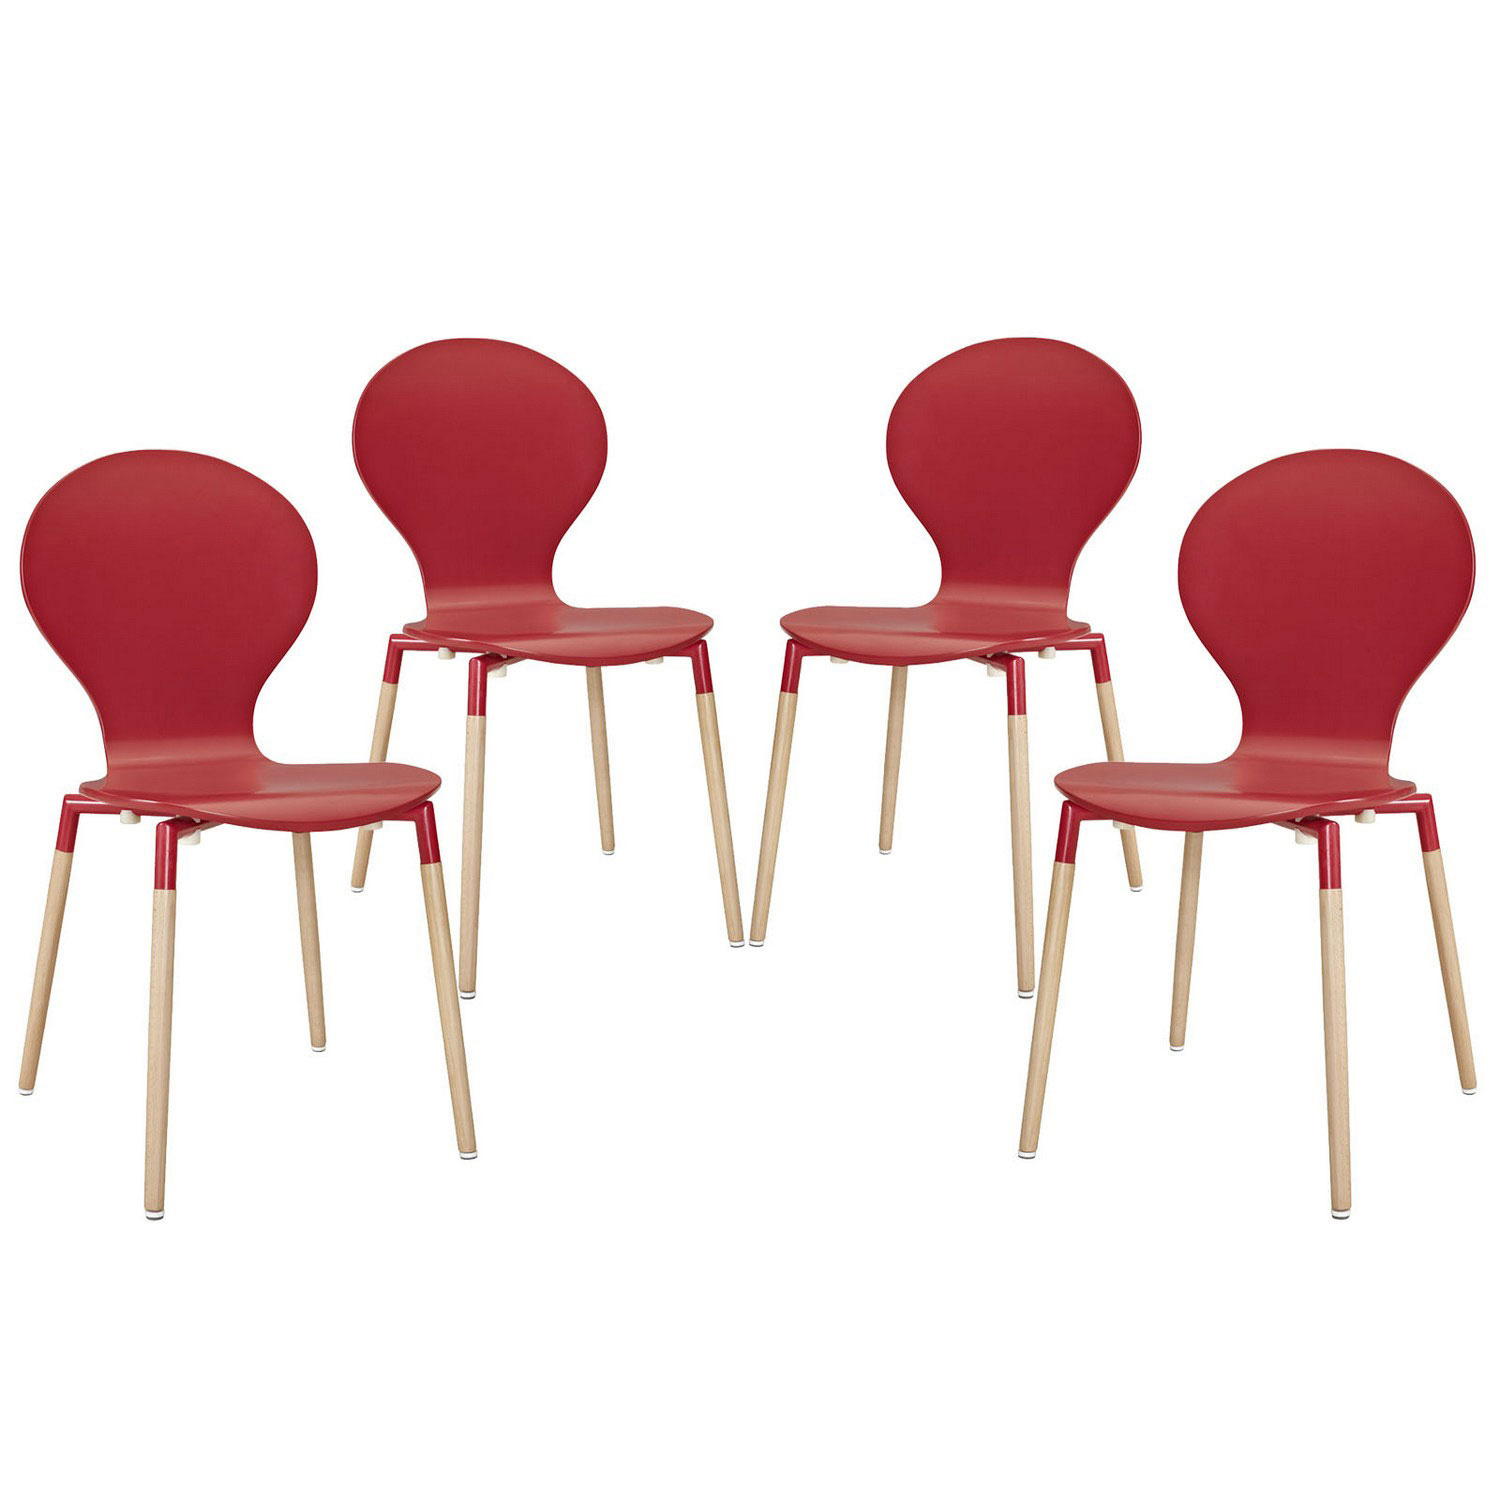 Modway Path Dining Chair Set of 4 - Red